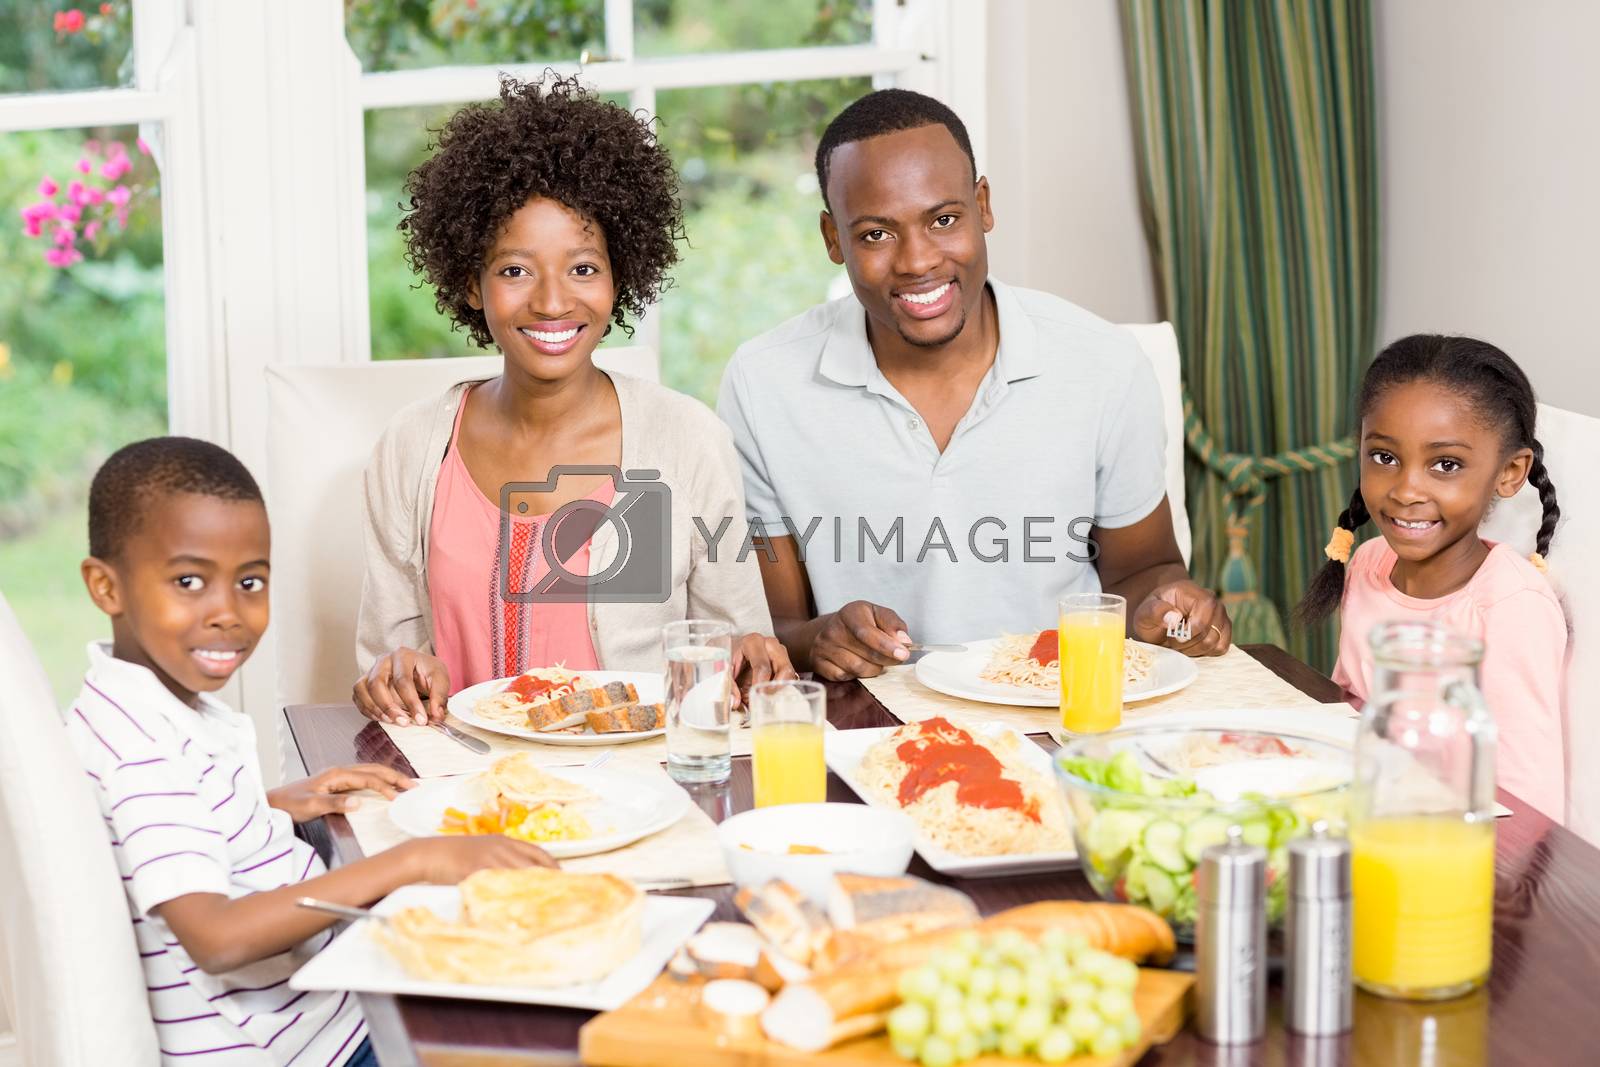 Royalty free image of Portrait of happy family eating together by Wavebreakmedia